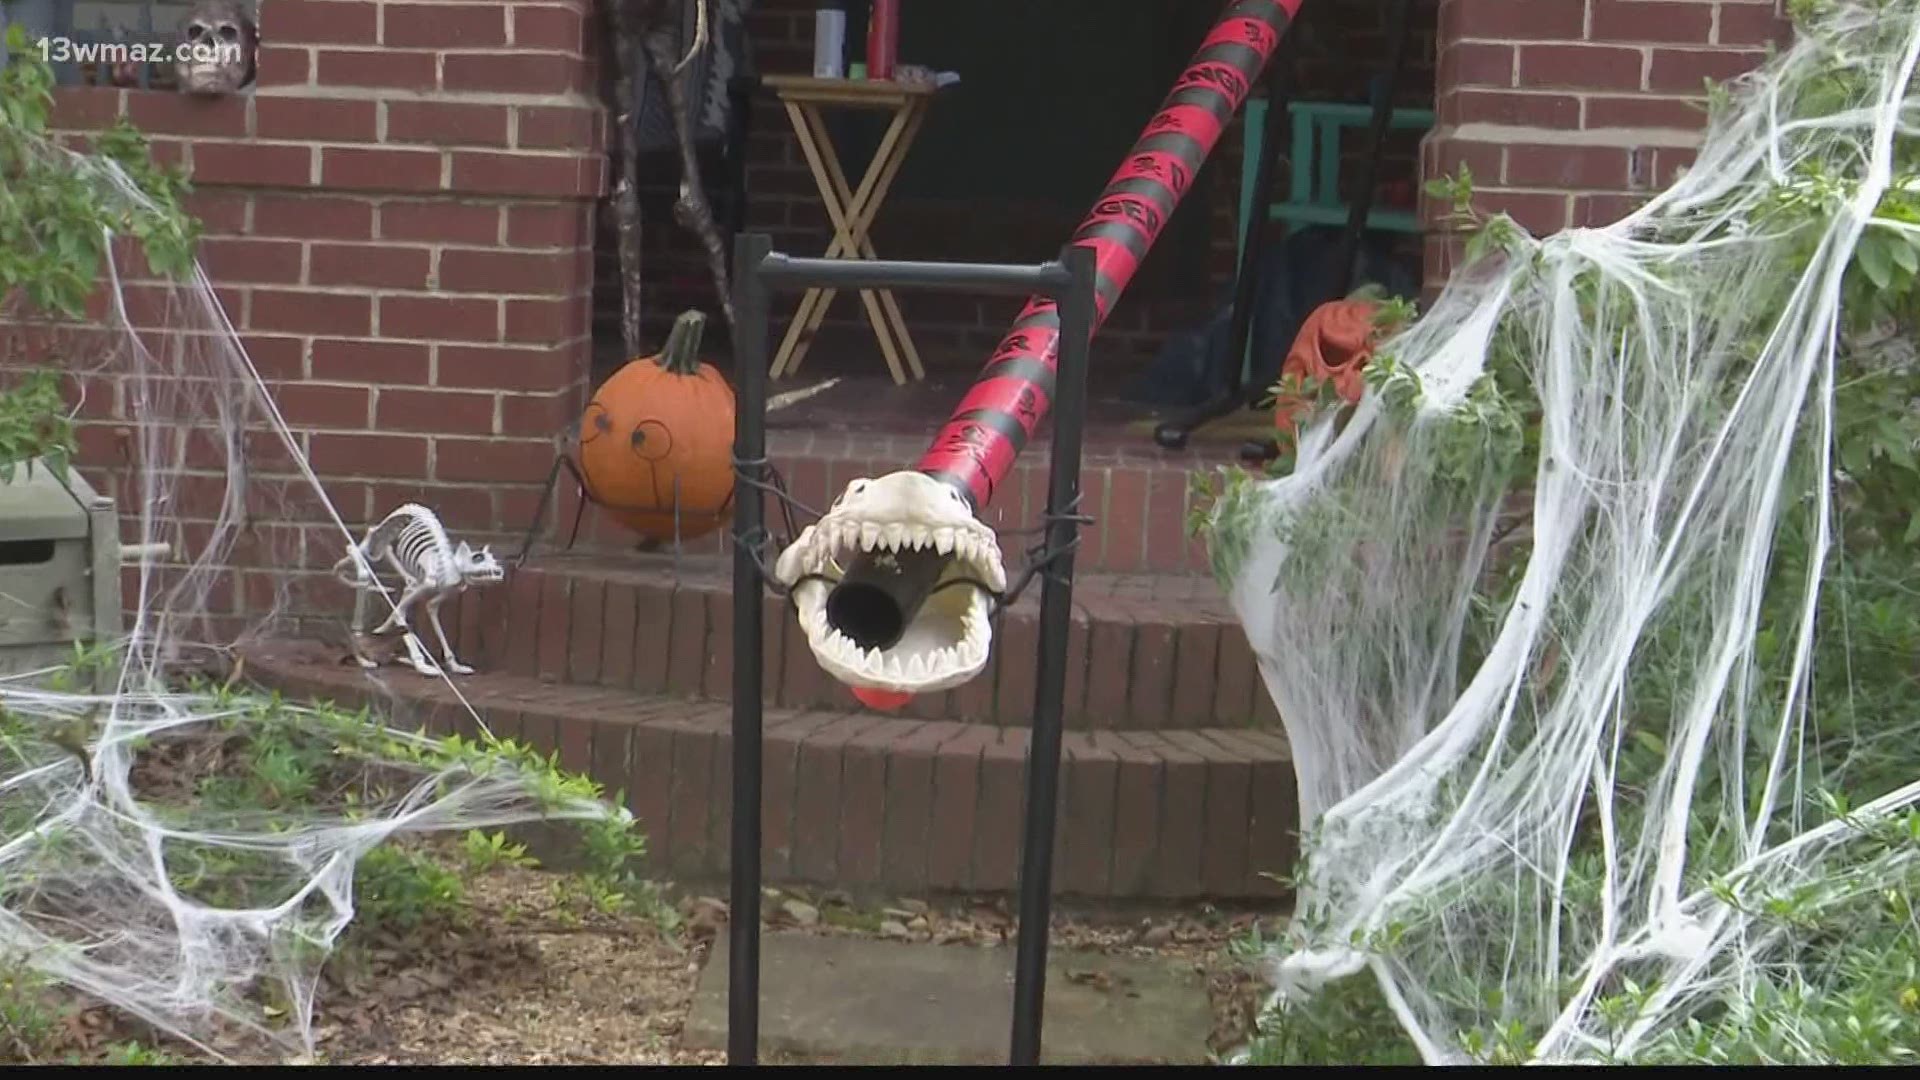 Some people who live on Ridge Avenue do not feel comfortable passing out candy this year, while others do.